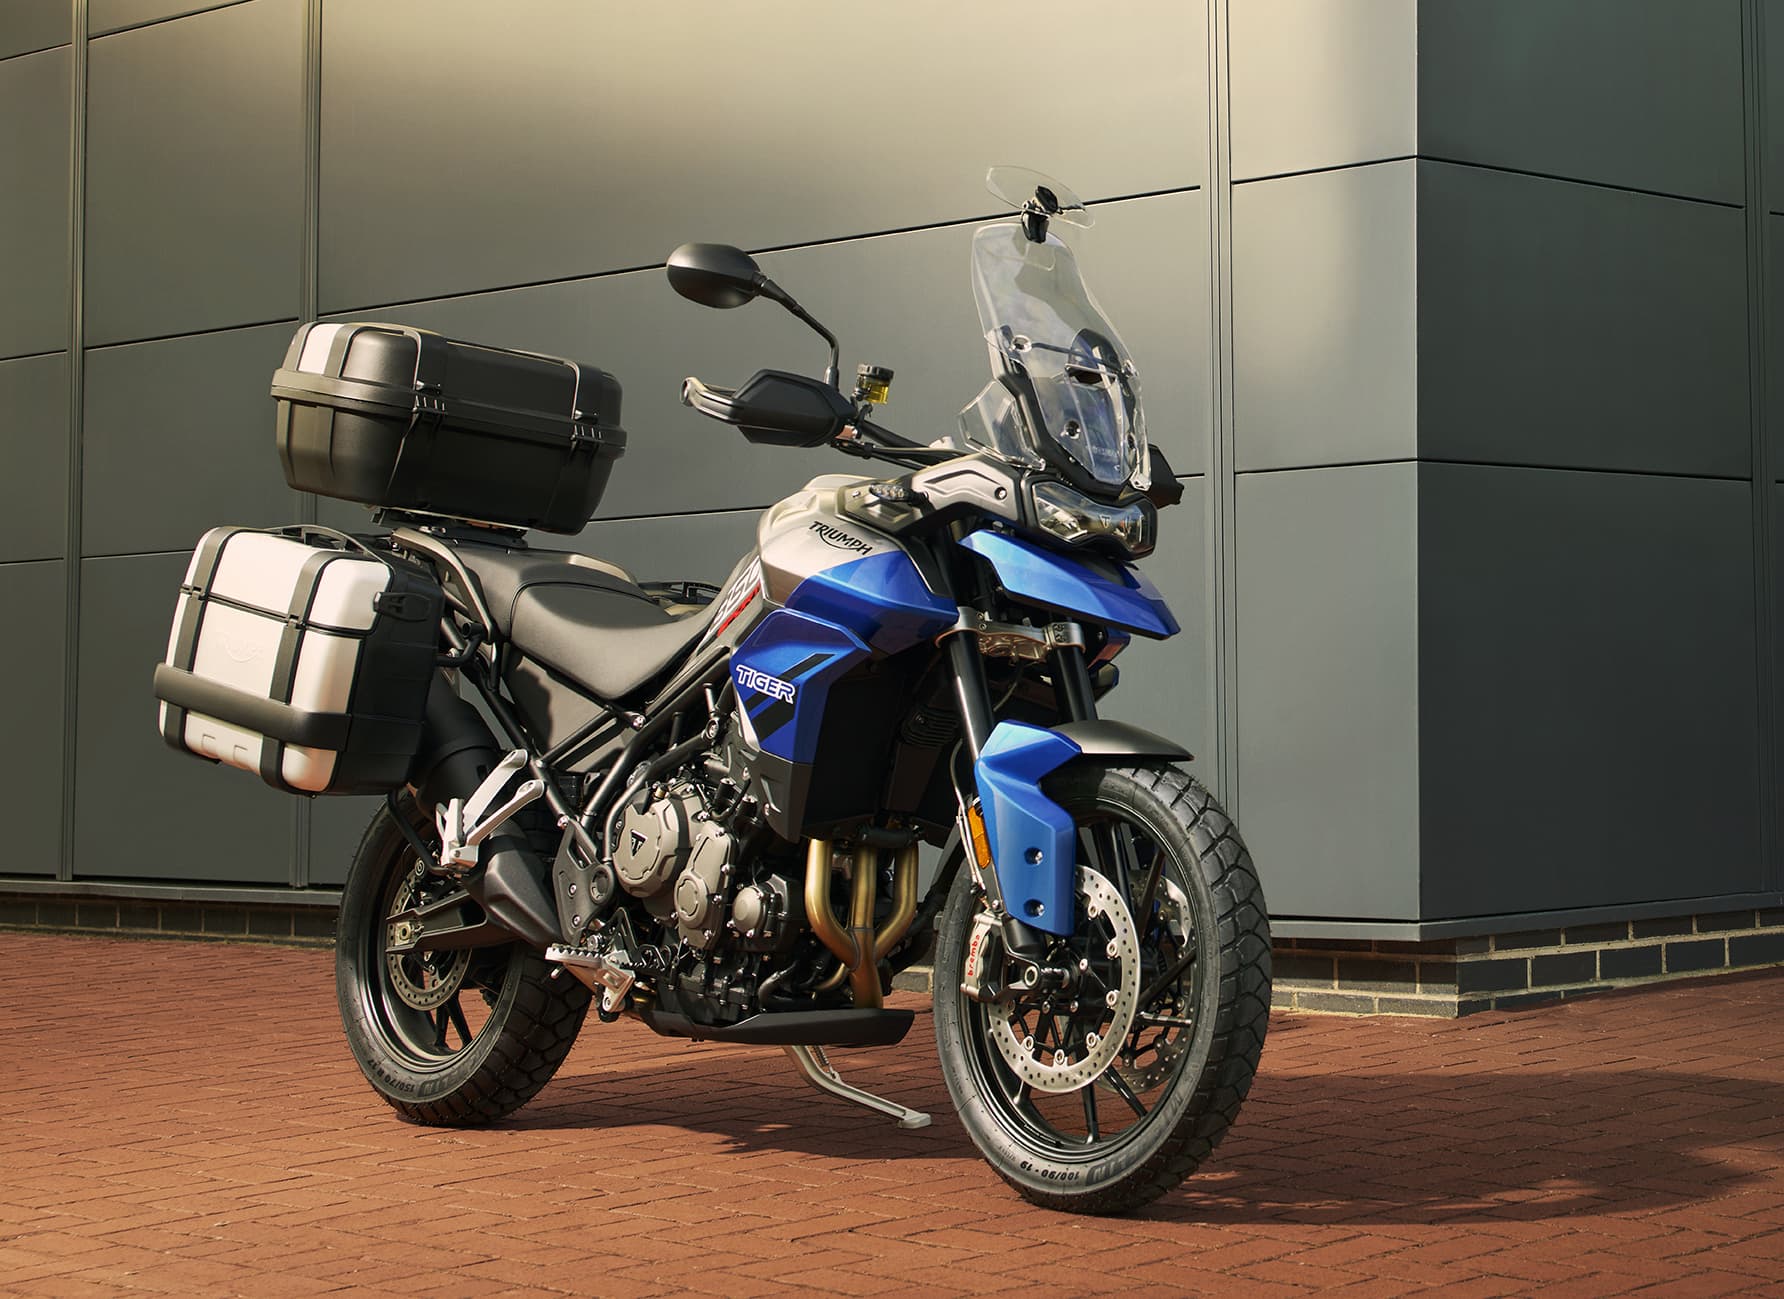 Triumph tiger 850 sport outdoor static image, luggage and accessories